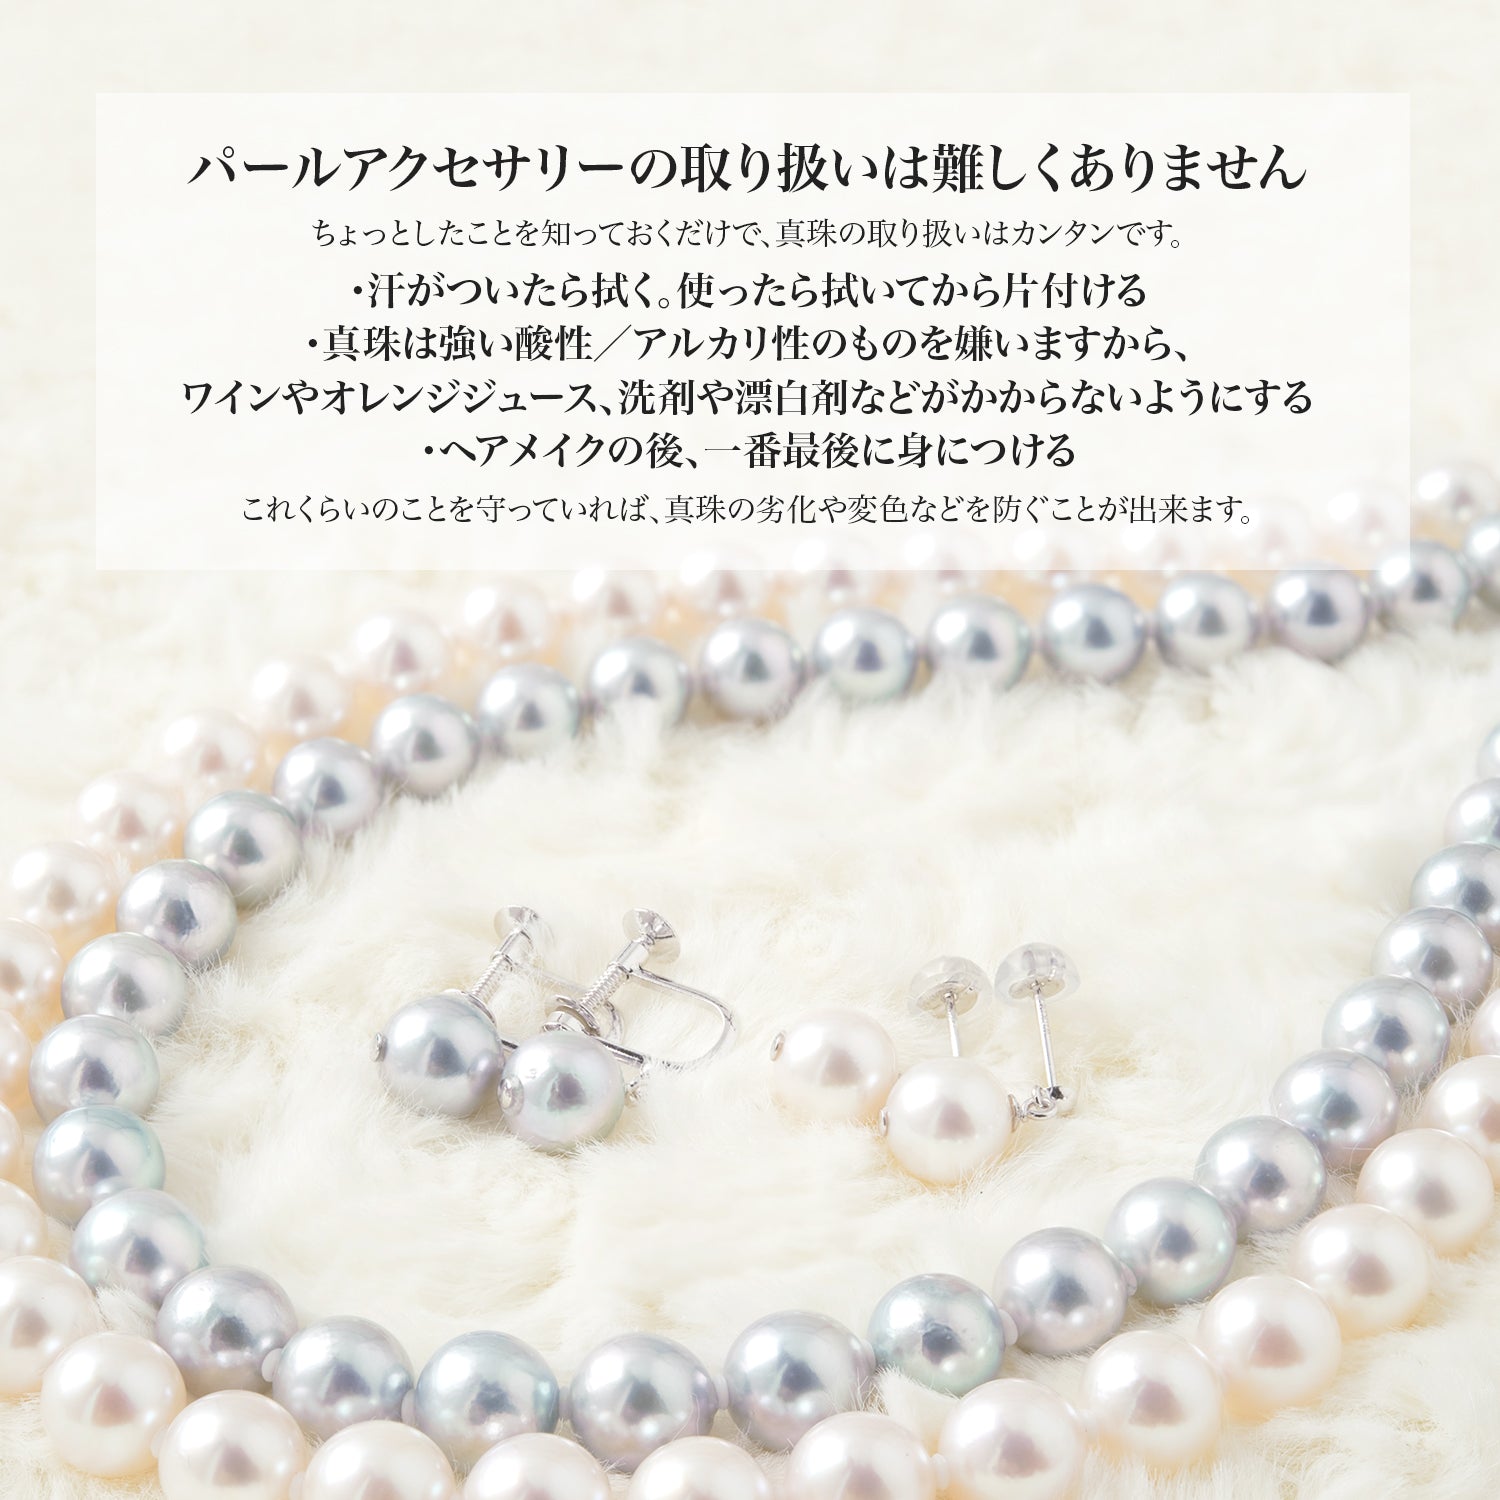 Hanadama Pearl Formal Necklace Set of 2 [7.0-7.5mm] (Earrings Included) Formal Set with Certificate of Authenticity and Storage Case for Ceremonial Occasions